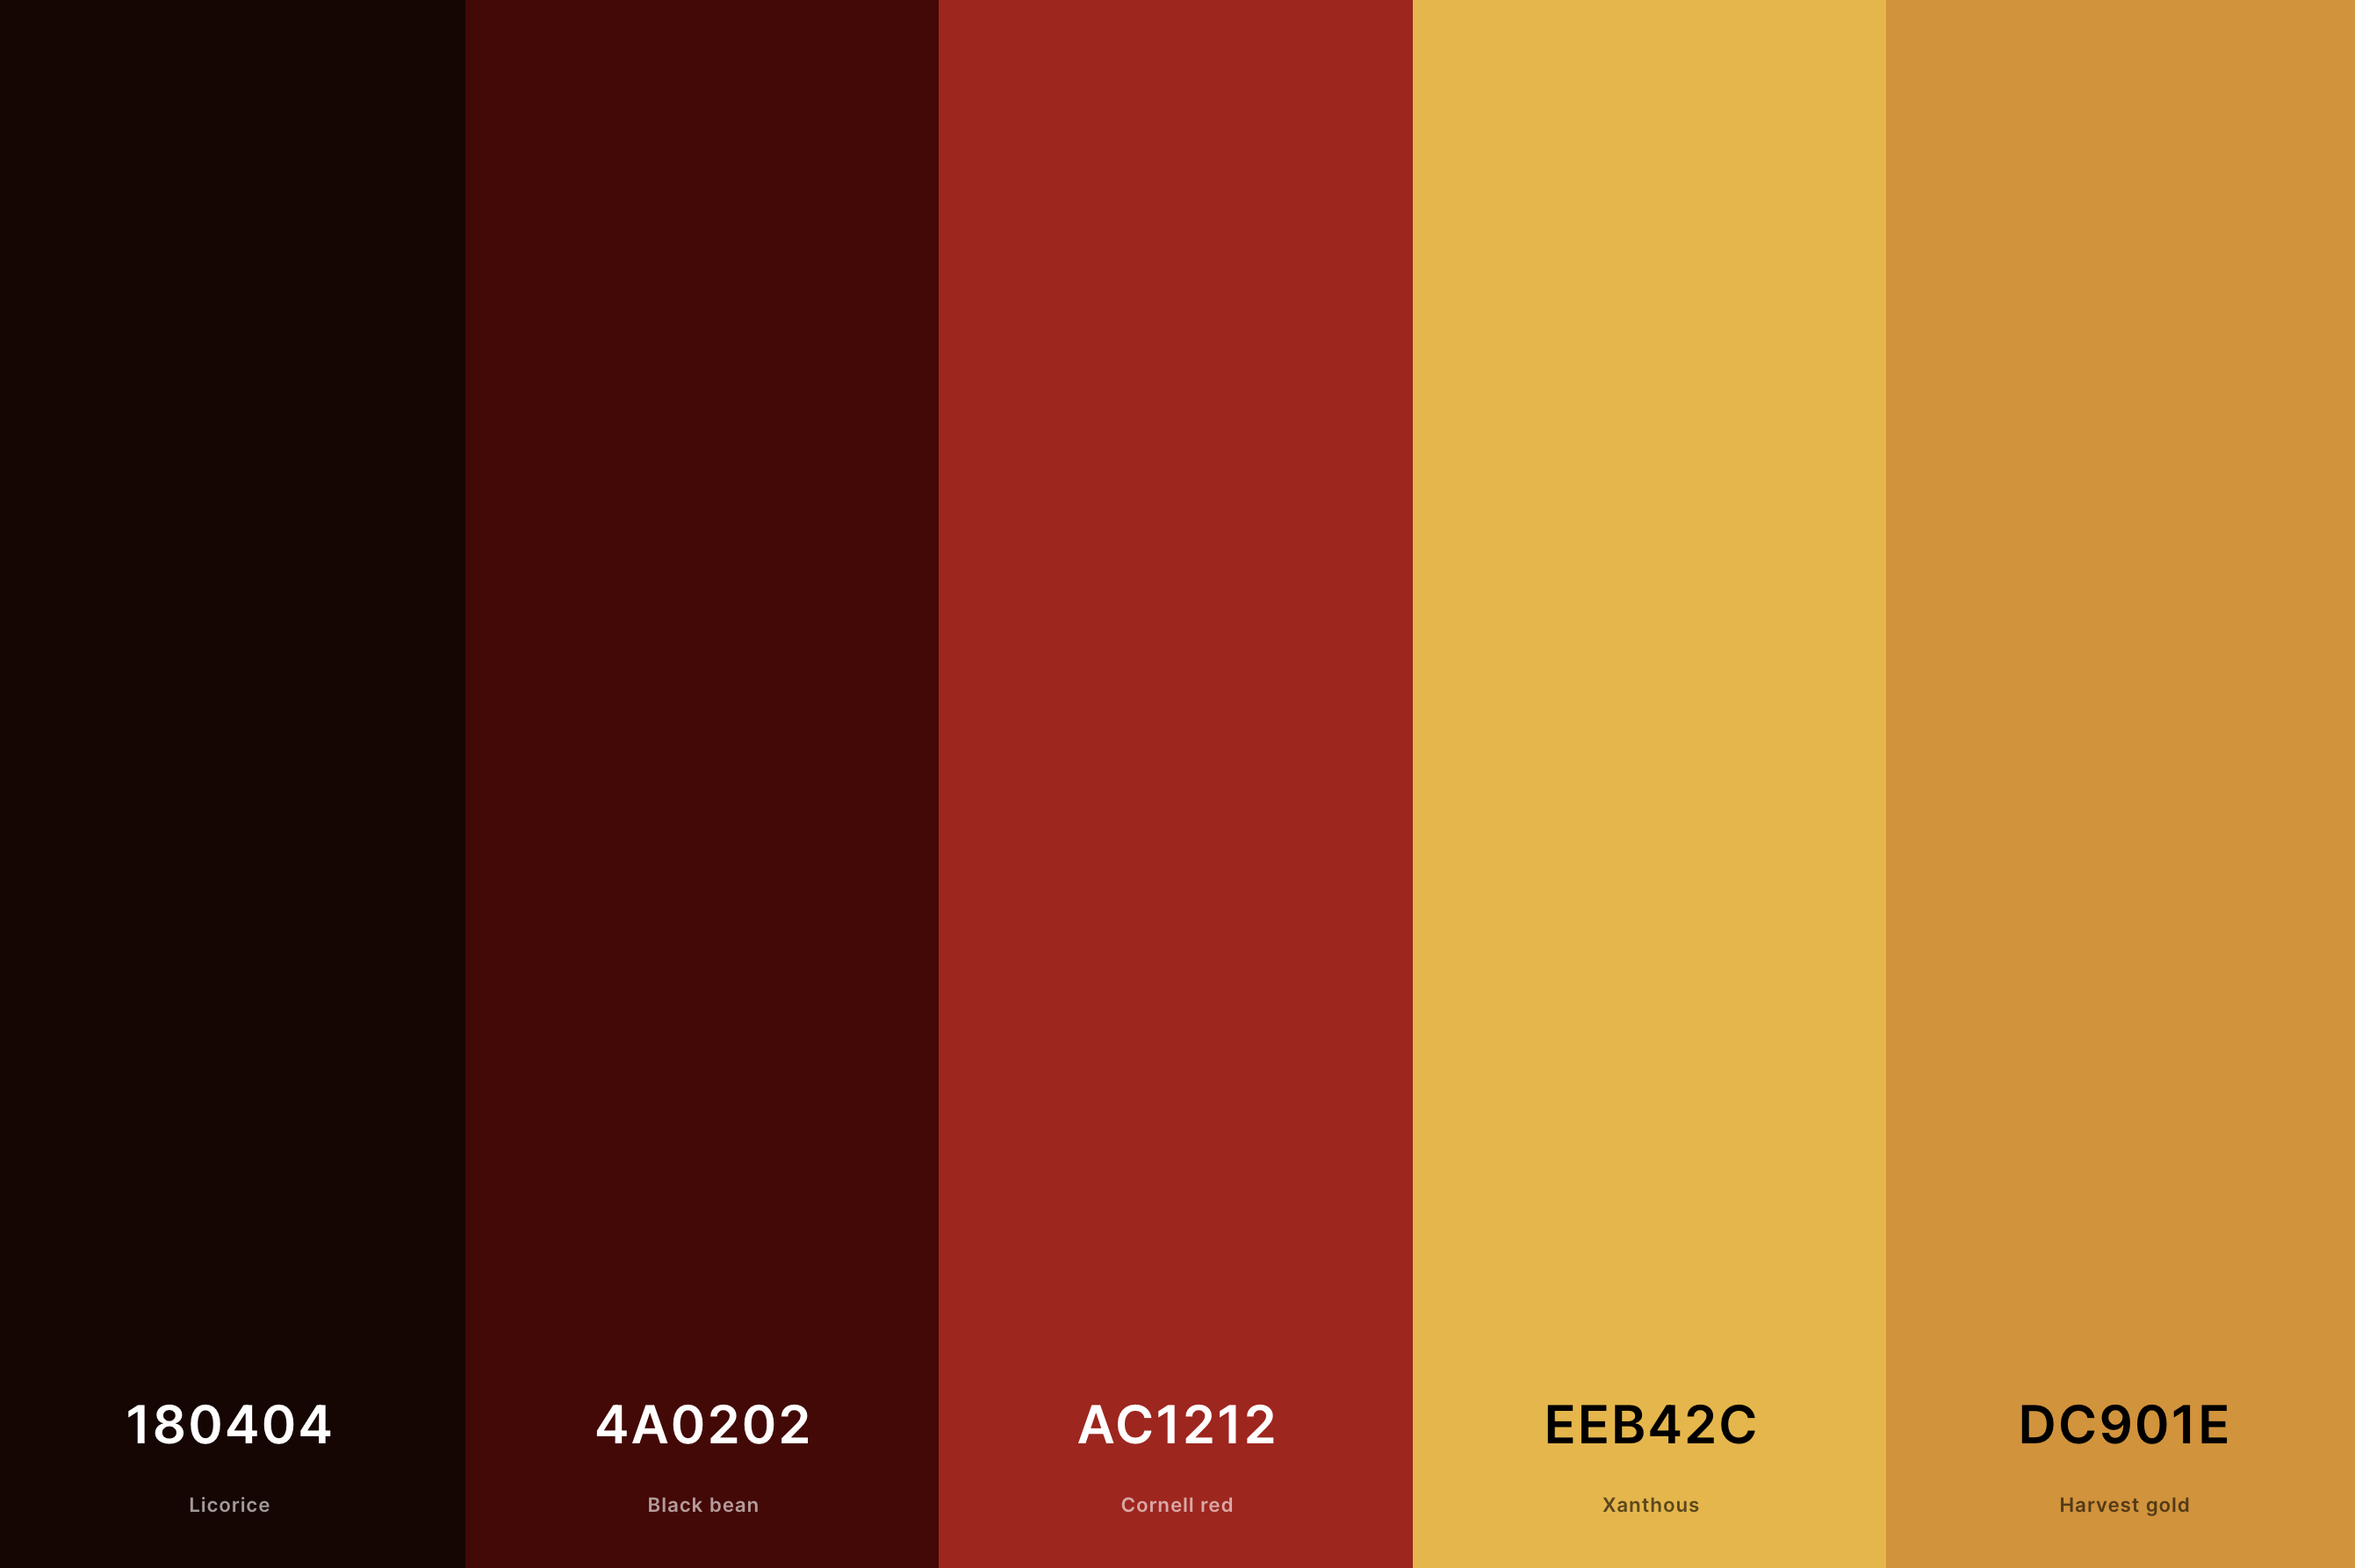 12. Red, Black And Gold Color Palette Color Palette with Licorice (Hex #180404) + Black Bean (Hex #4A0202) + Cornell Red (Hex #AC1212) + Xanthous (Hex #EEB42C) + Harvest Gold (Hex #DC901E) Color Palette with Hex Codes